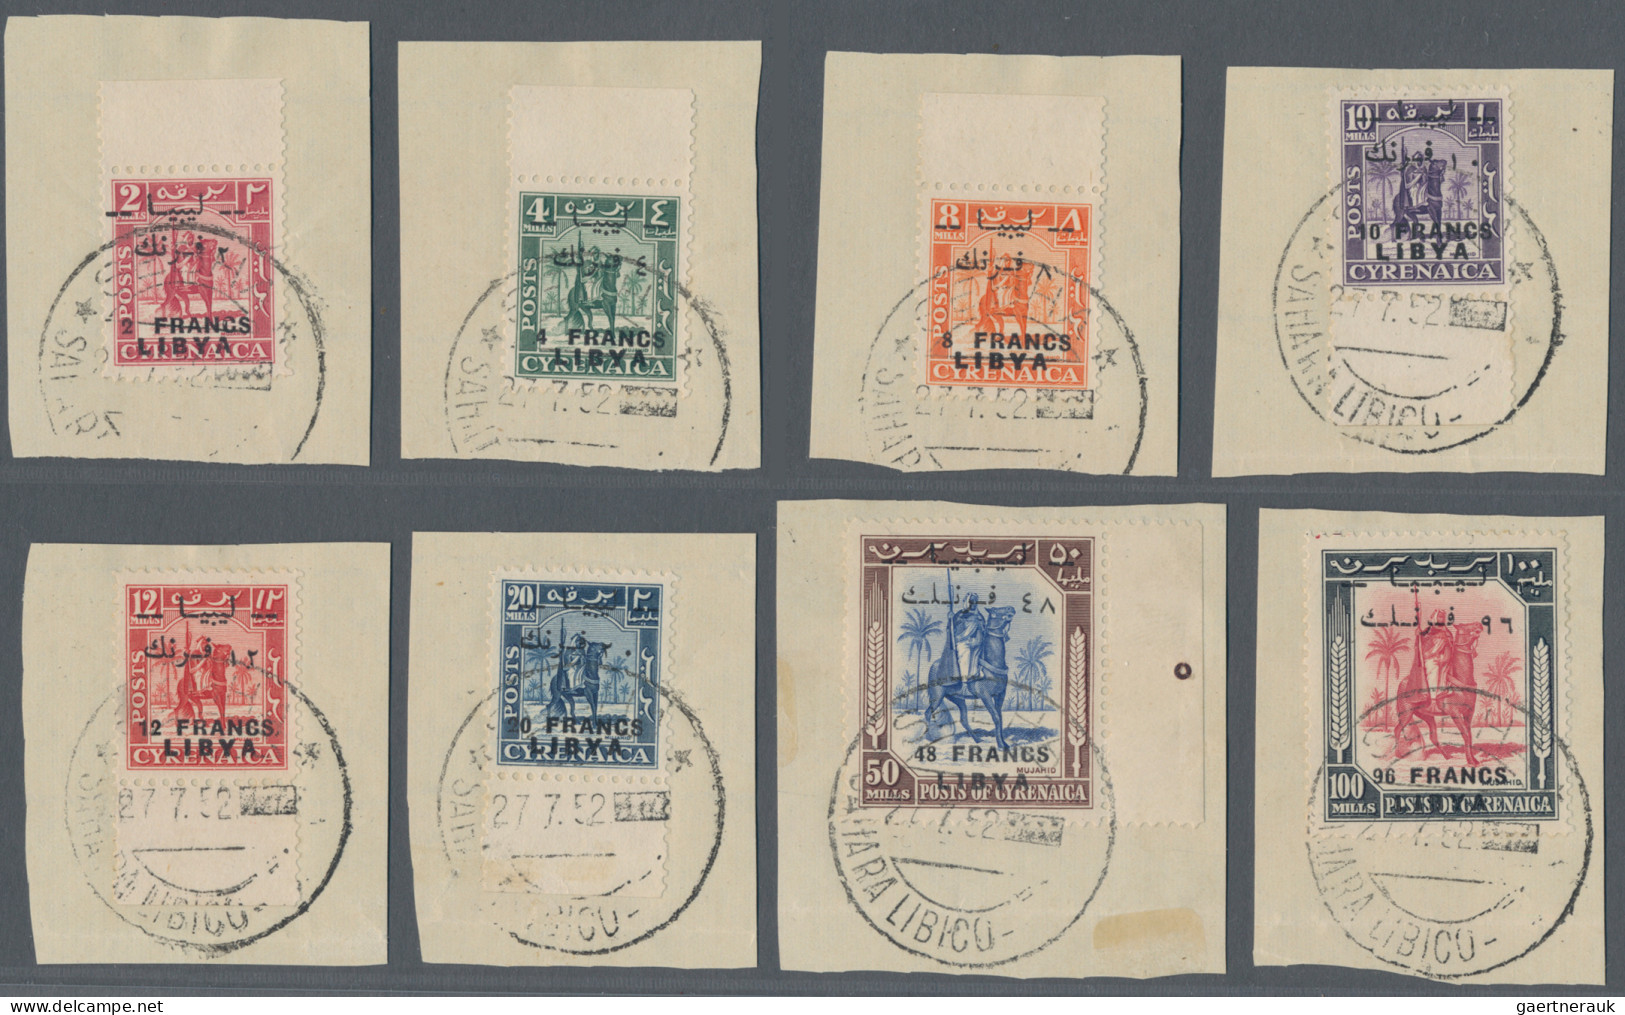 Libya: 1951, First Issue "Camel Trooper" Overprinted "LIBYA" And French Currency - Libya